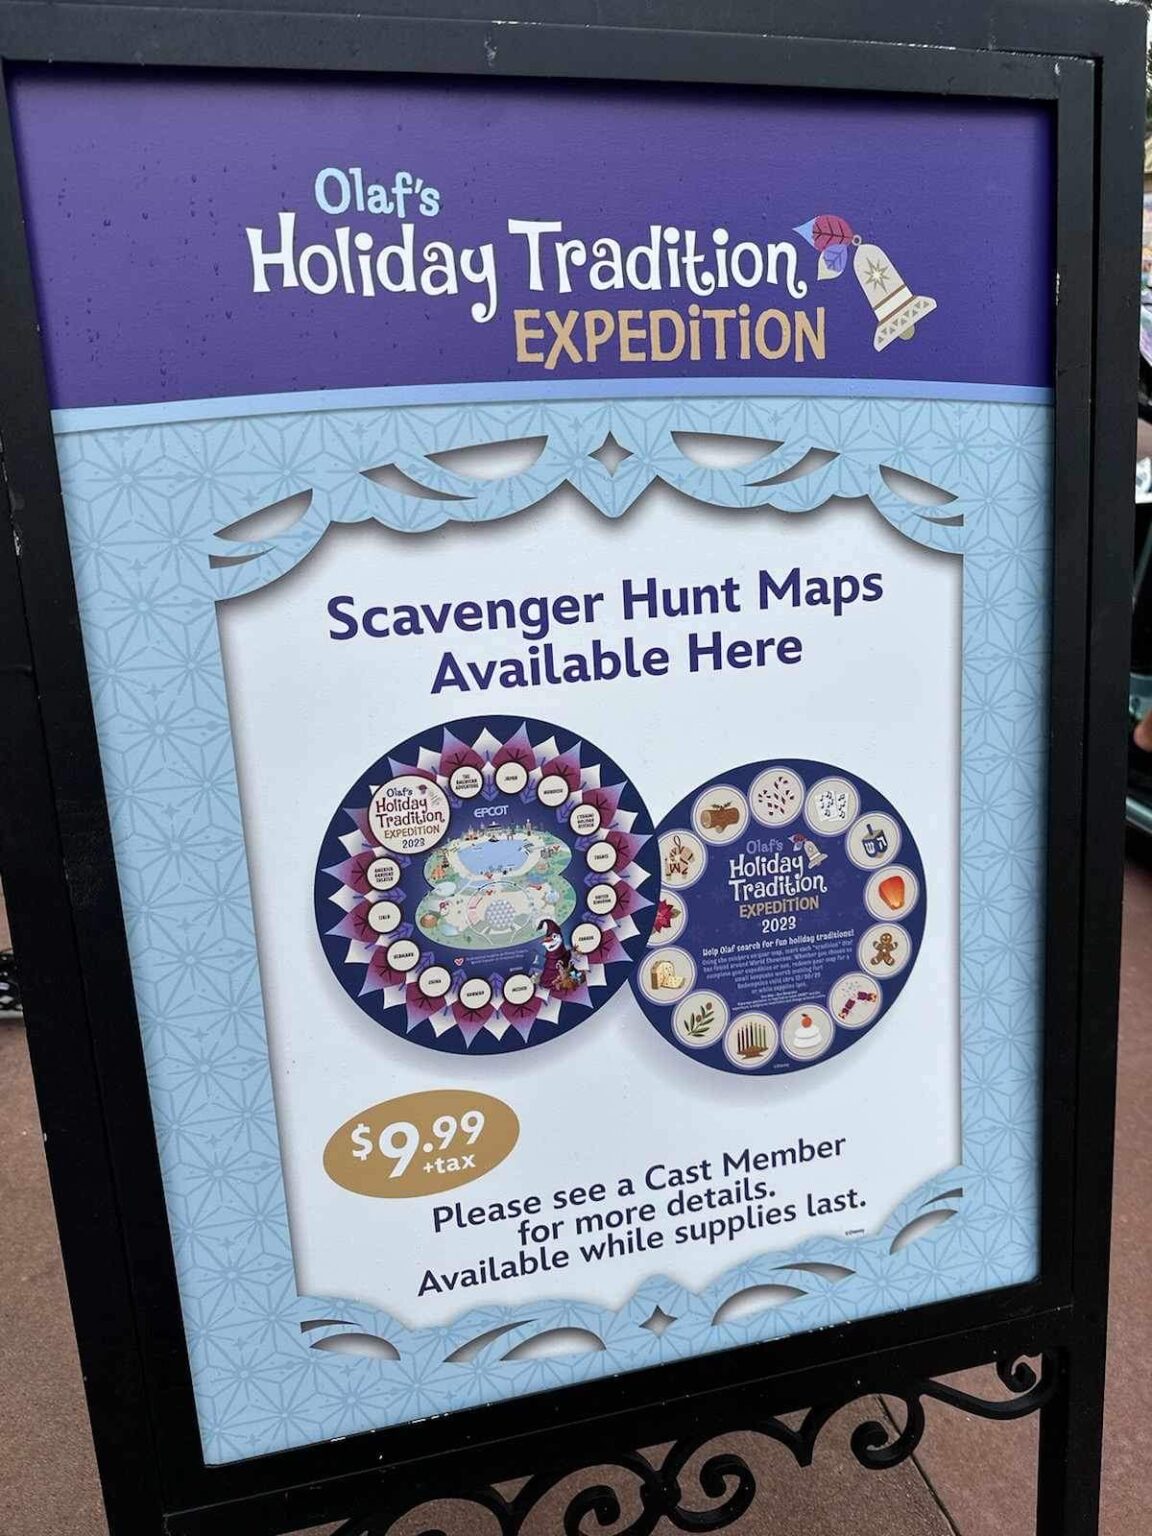 The Olaf Scavenger Hunt at EPCOT Celebrates Holiday Traditions